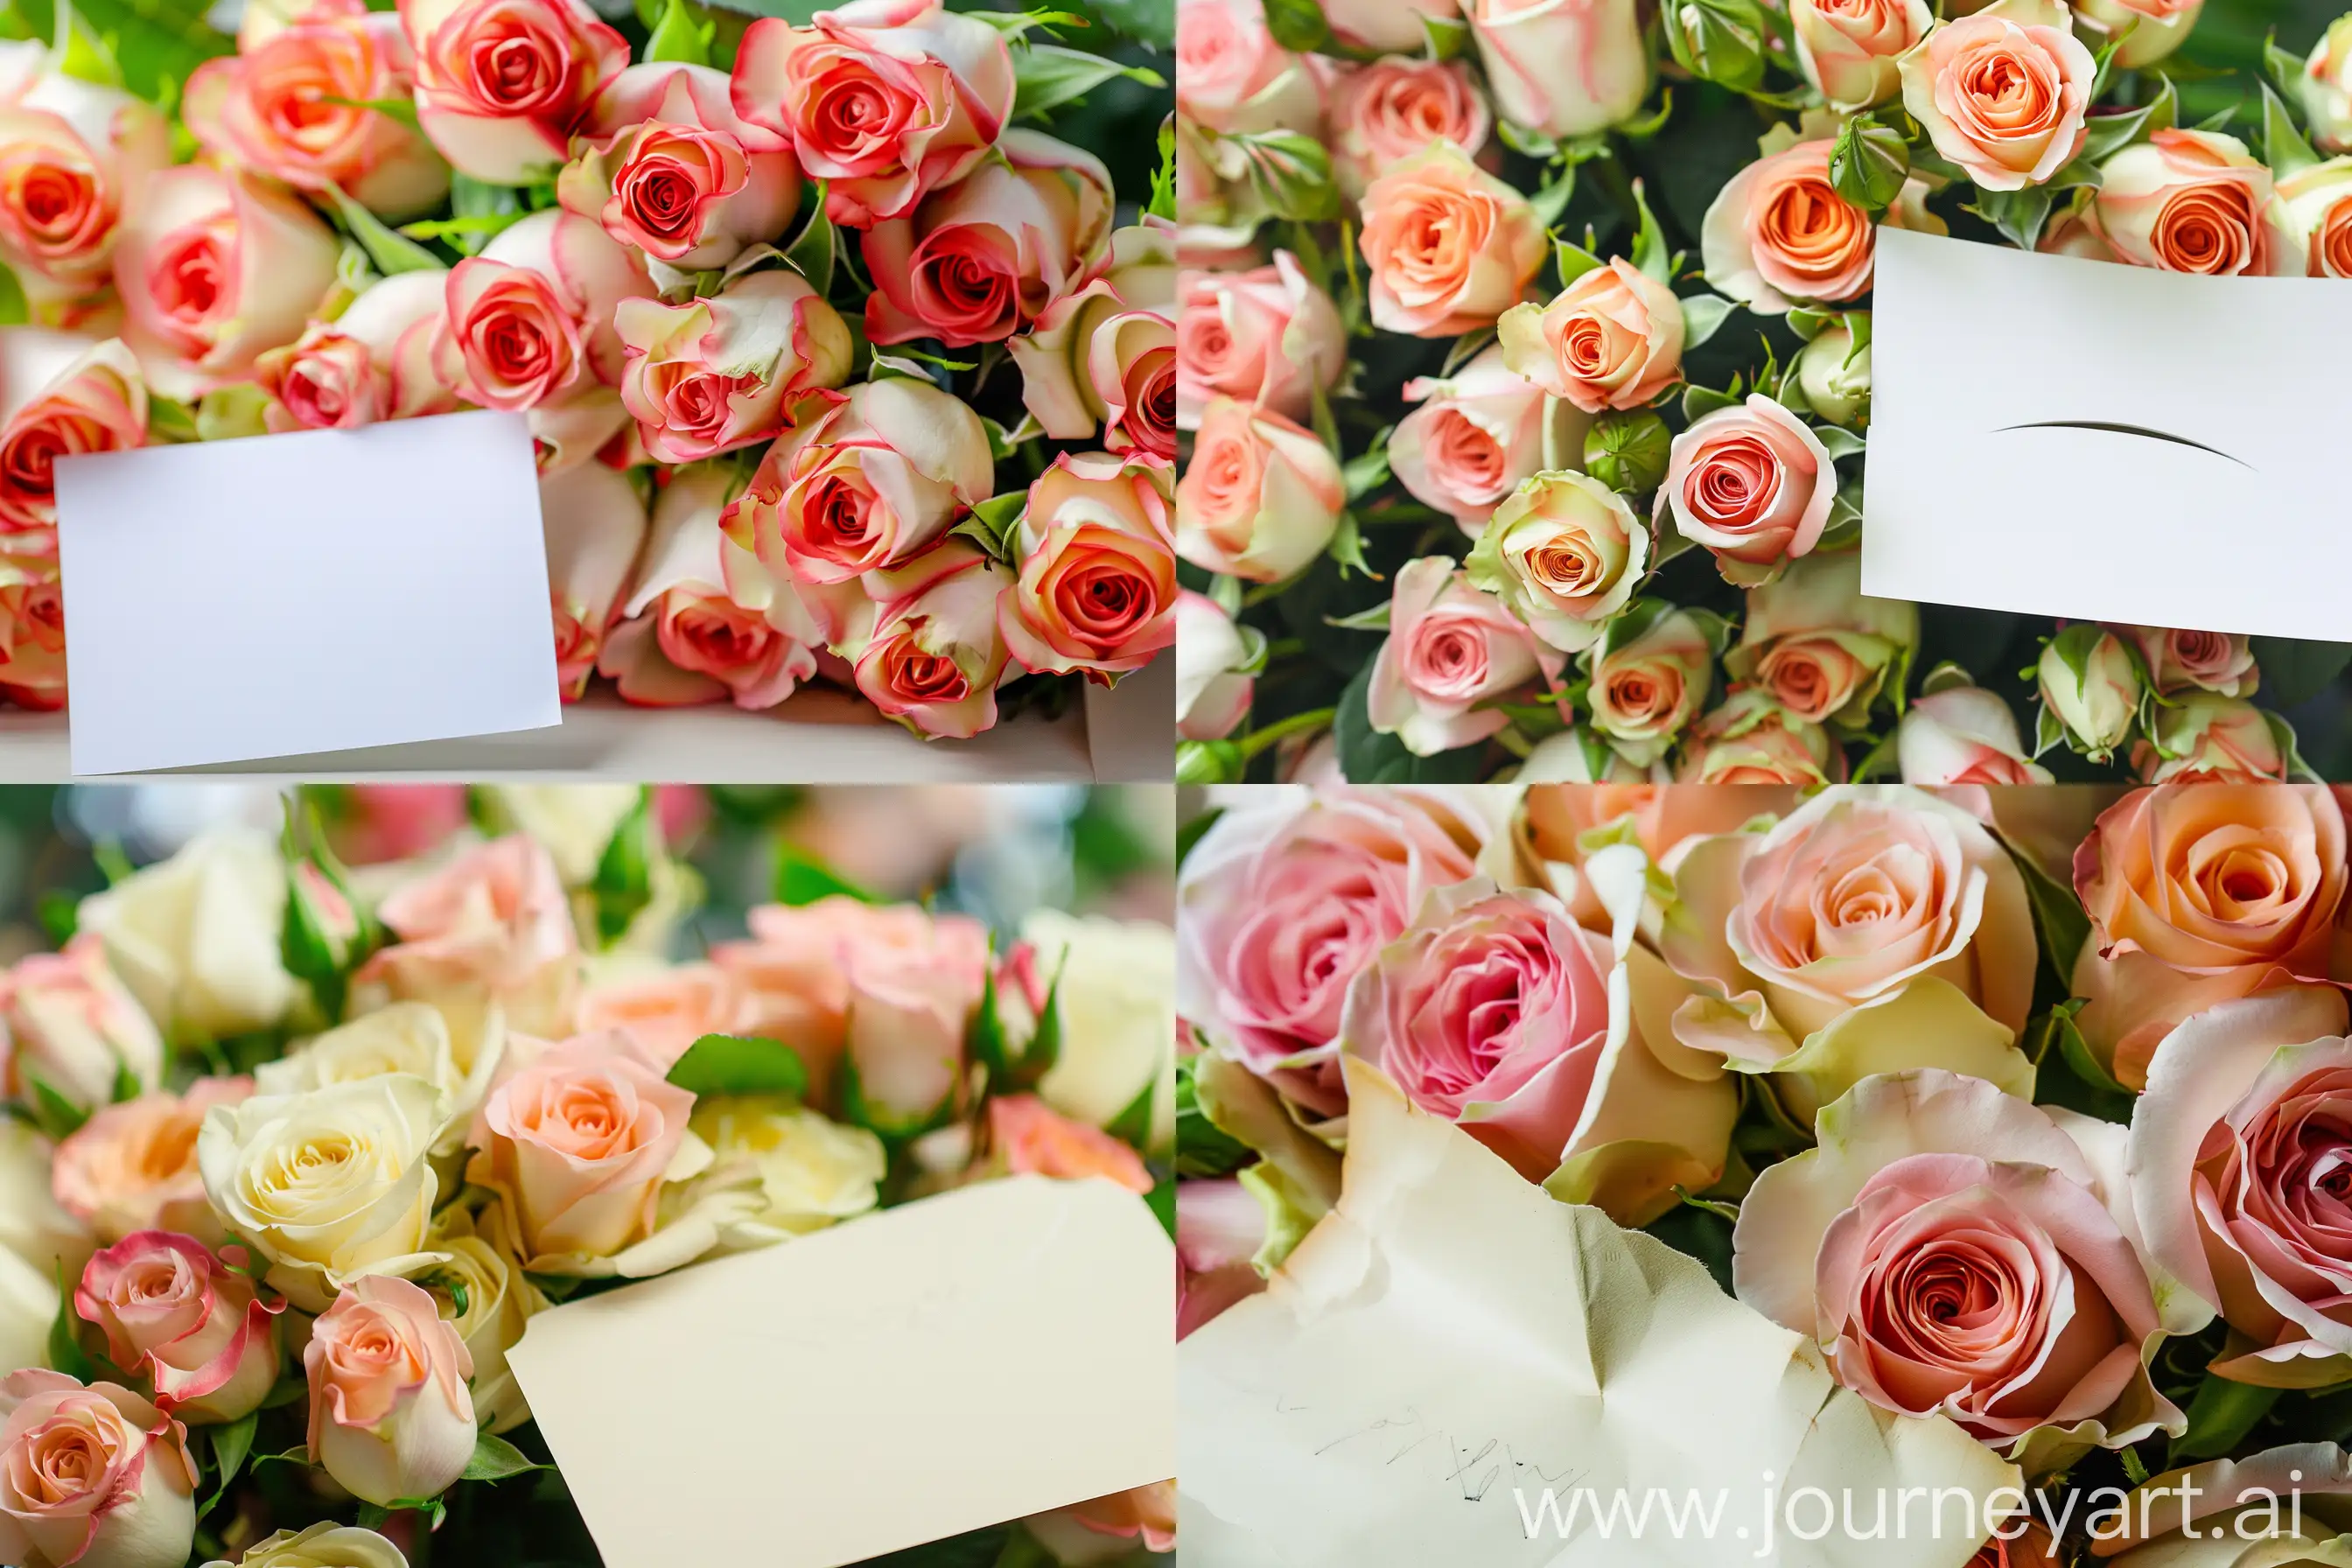 Romantic-Red-Roses-Bouquet-with-Blank-Love-Note-Soft-Focus-Background